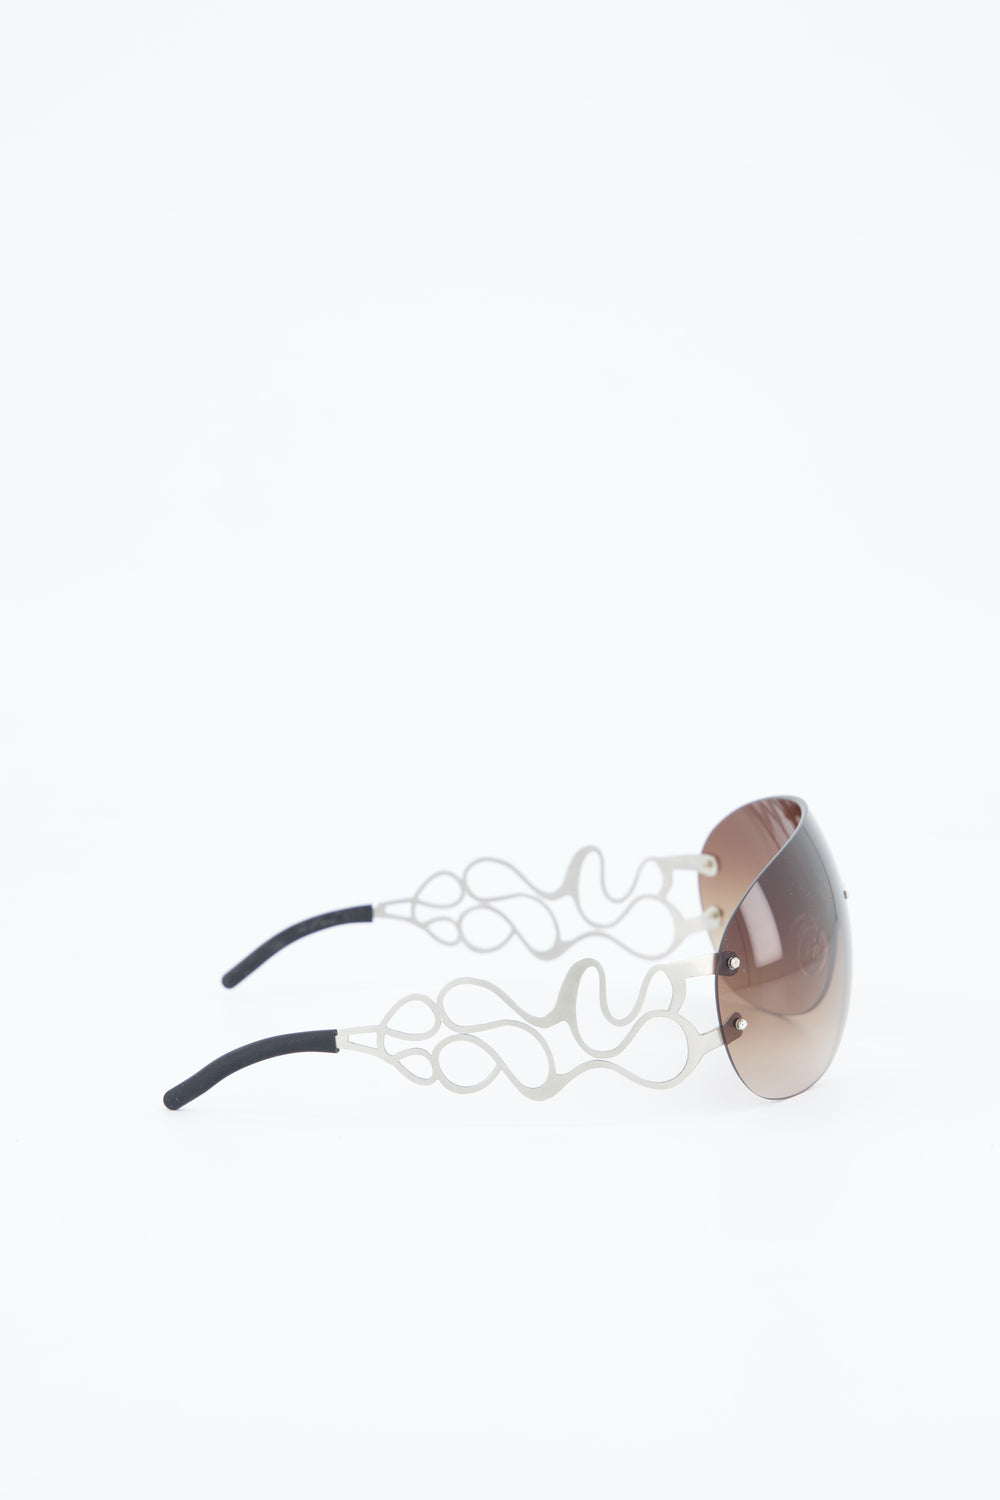 SUNGLASSES IN COLLABORATION WITH TD KENT